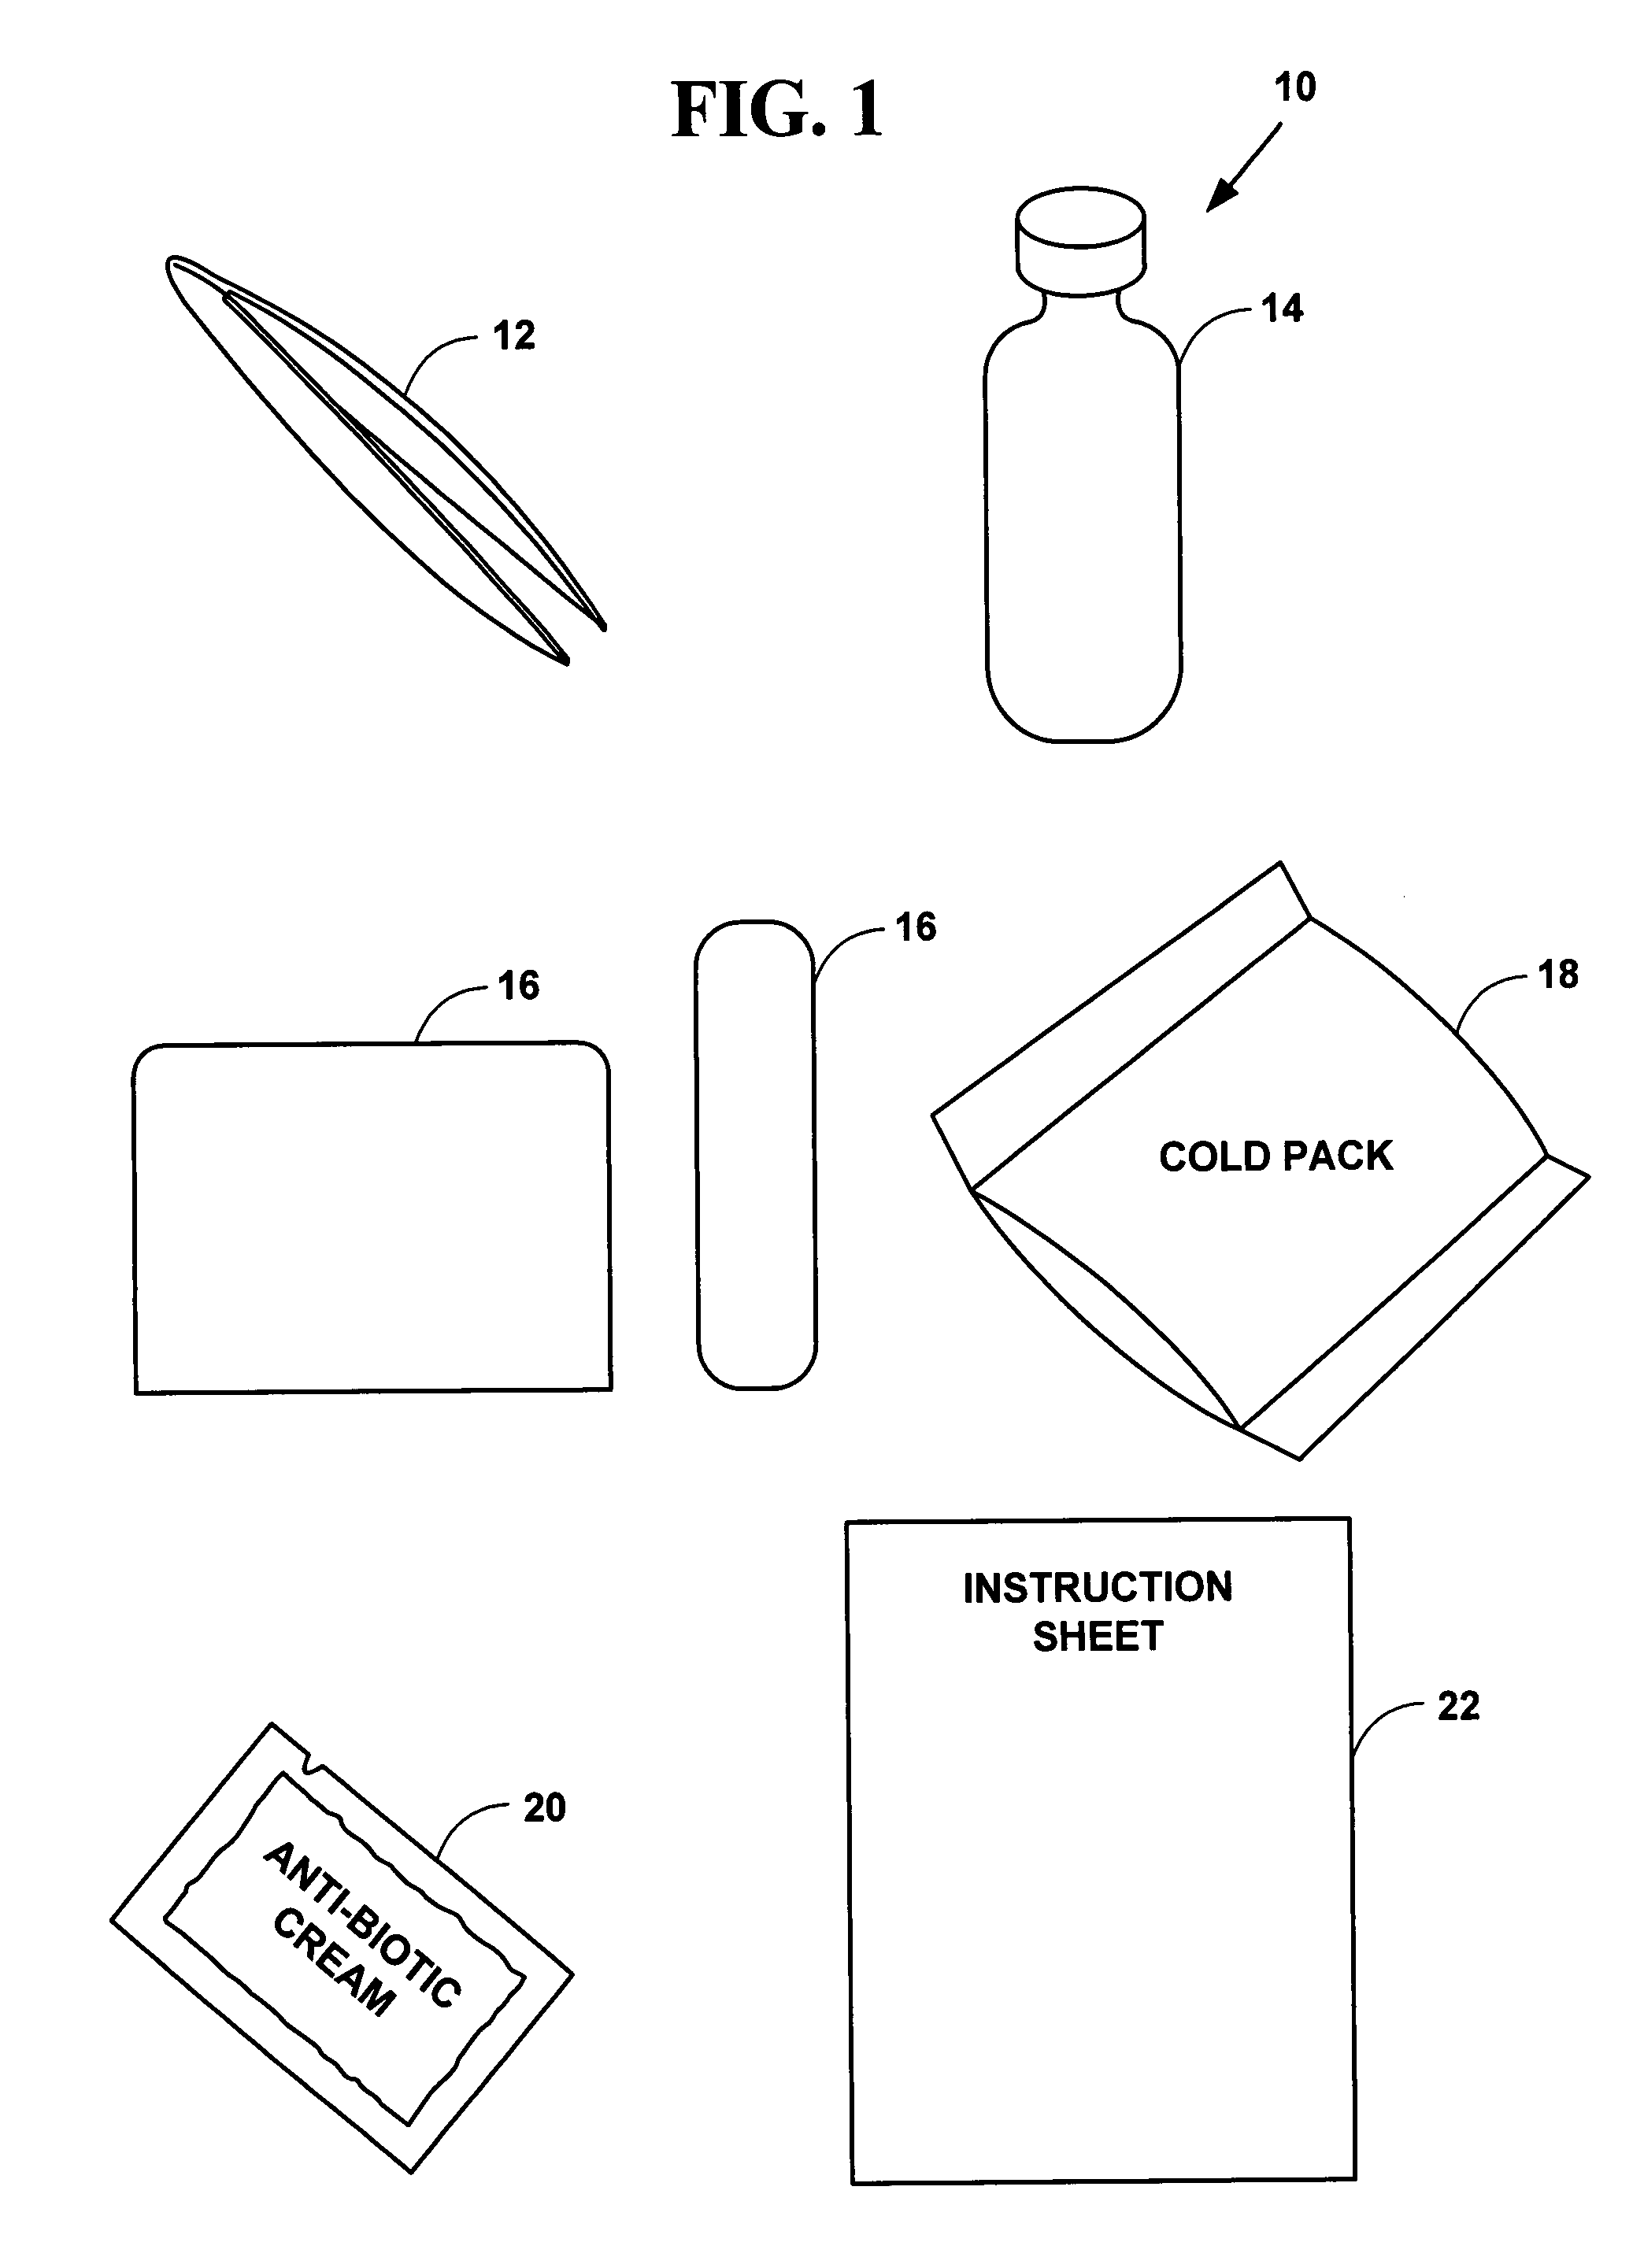 Sting kit apparatus and method of use